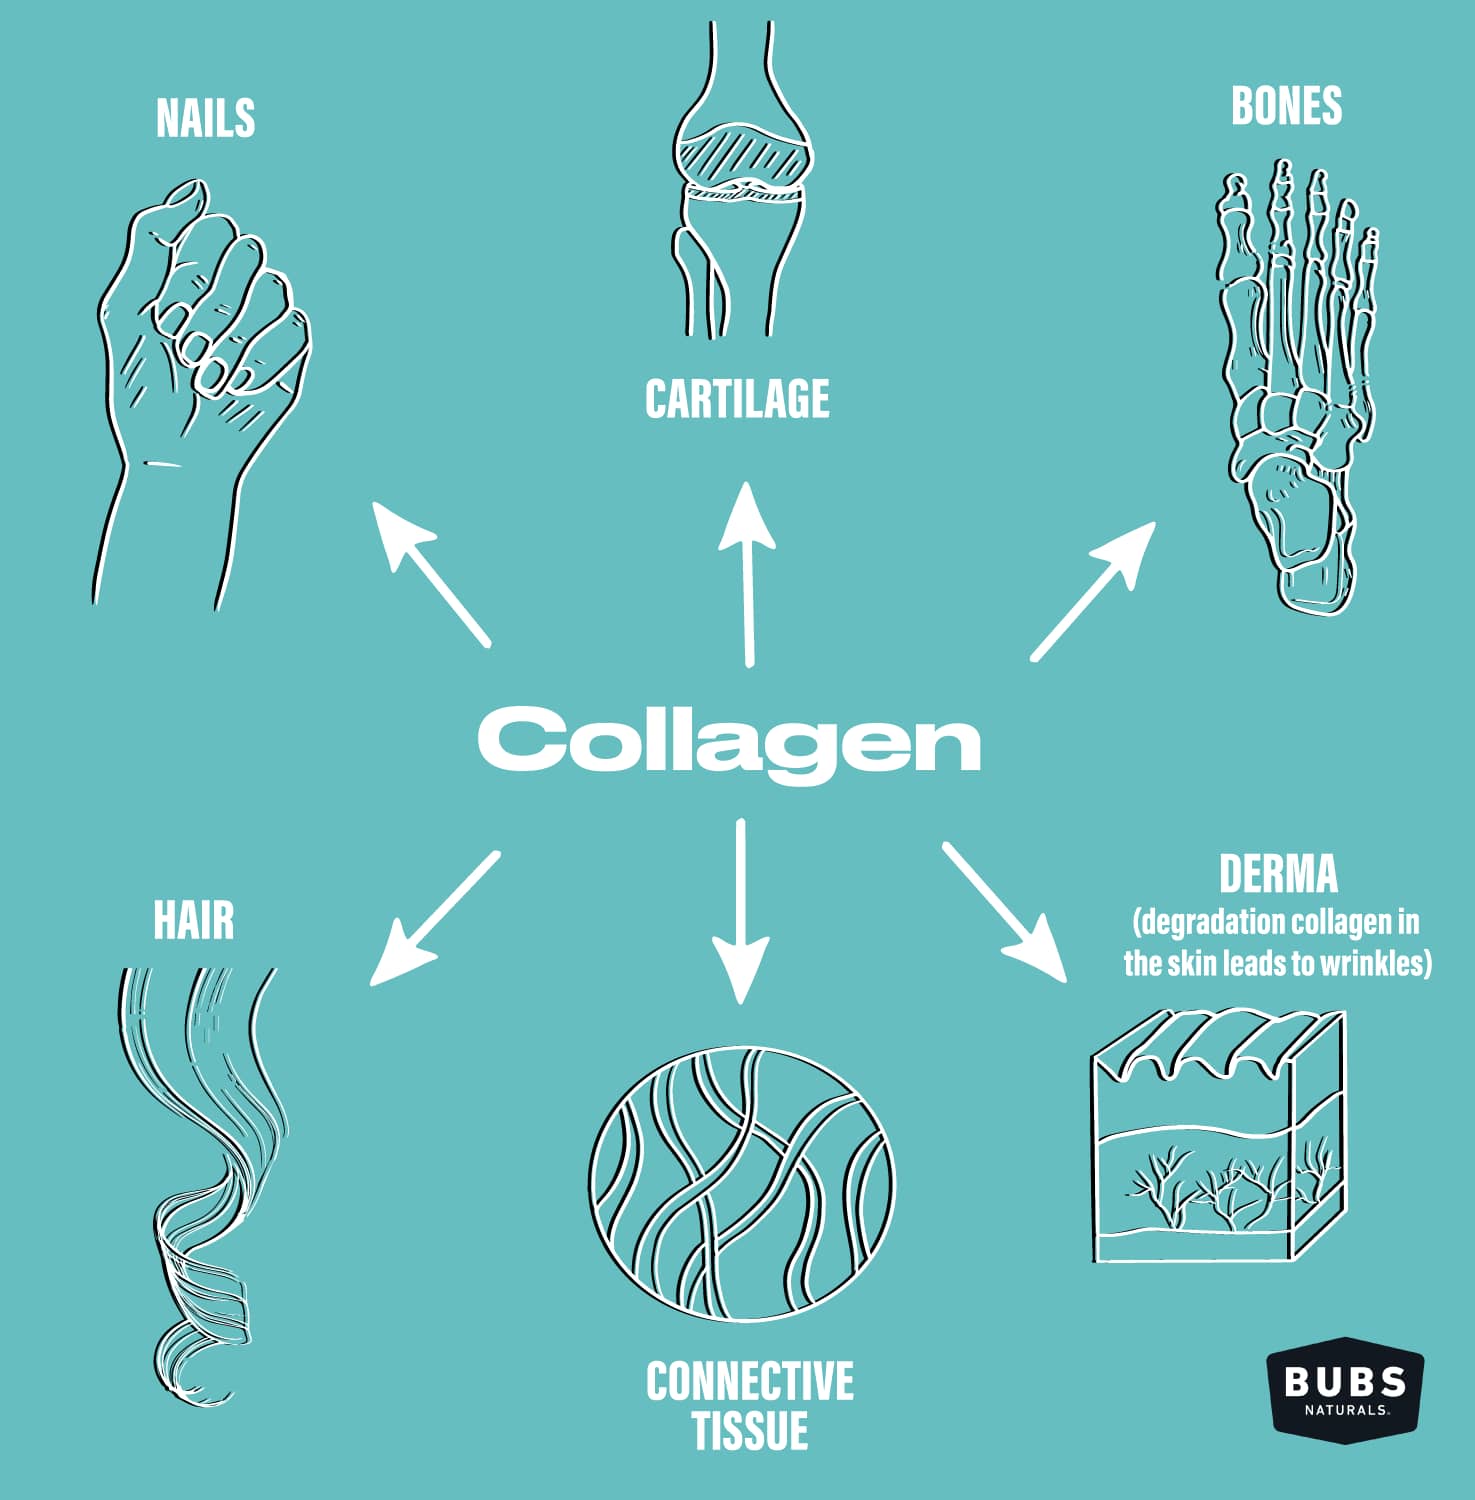 Collagen Benefits for Nails, Cartilage, Bones, Hair, Connective Tissue, and Skin